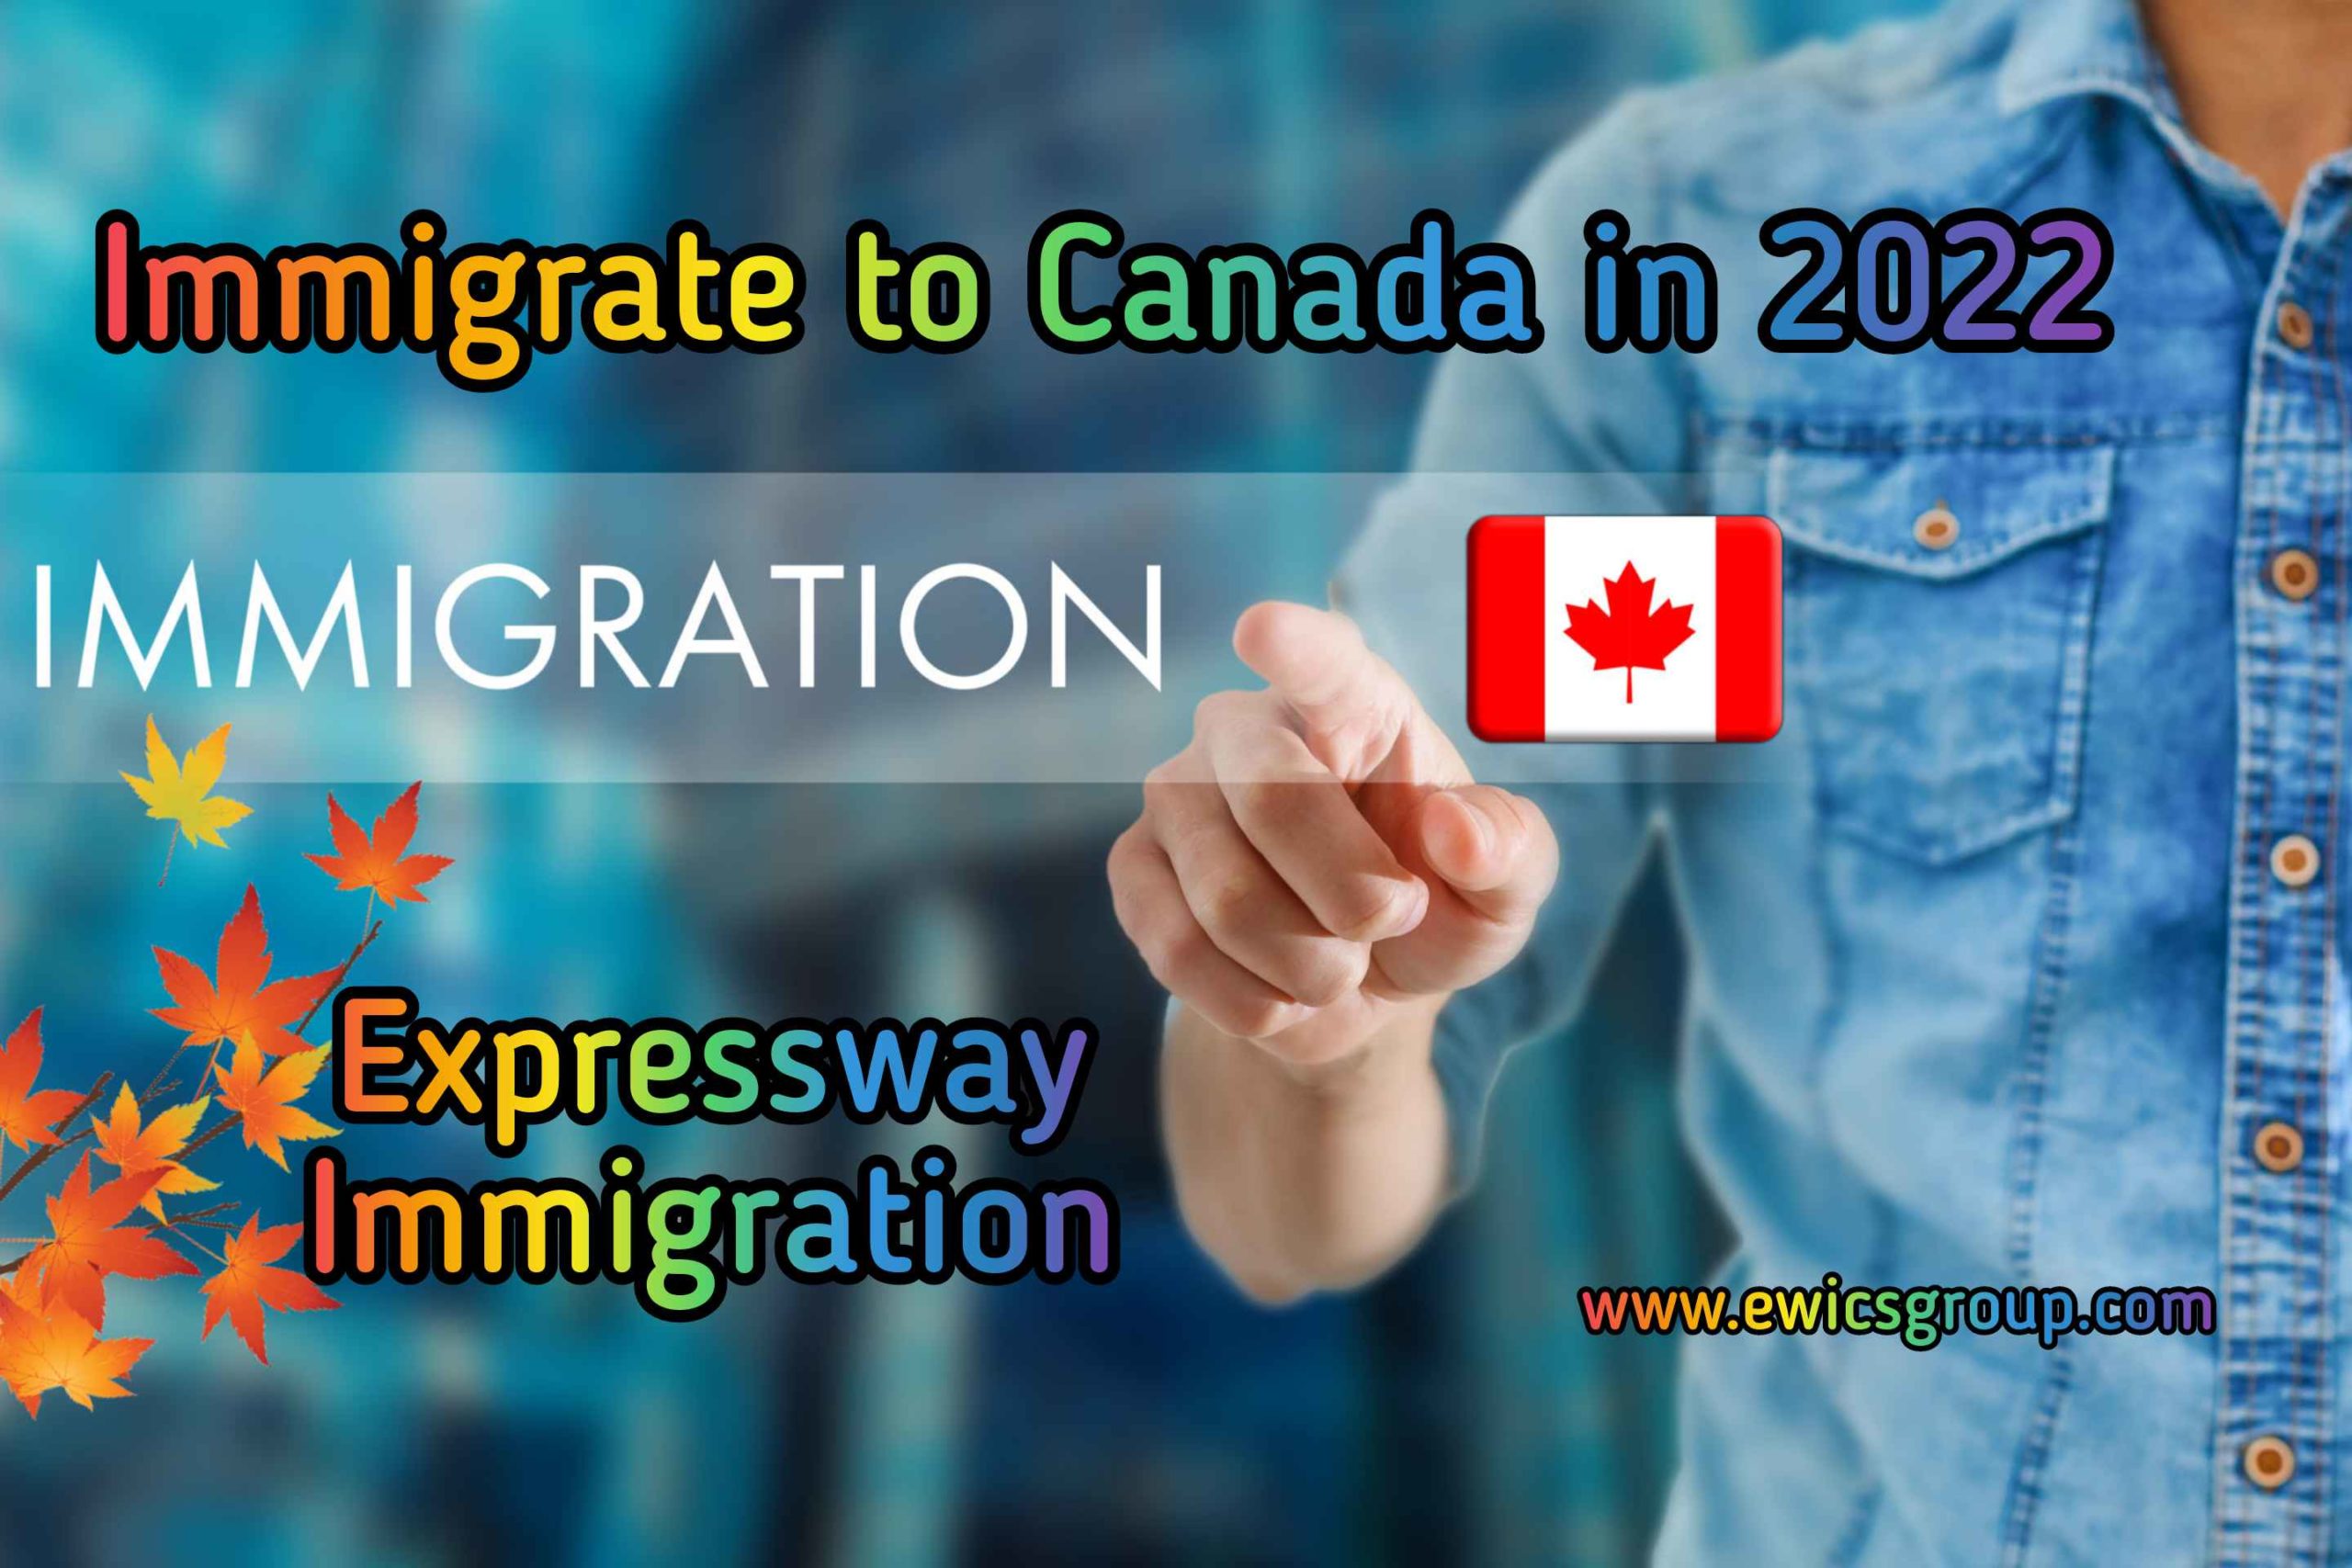 How to Immigrate to Canada in 2022